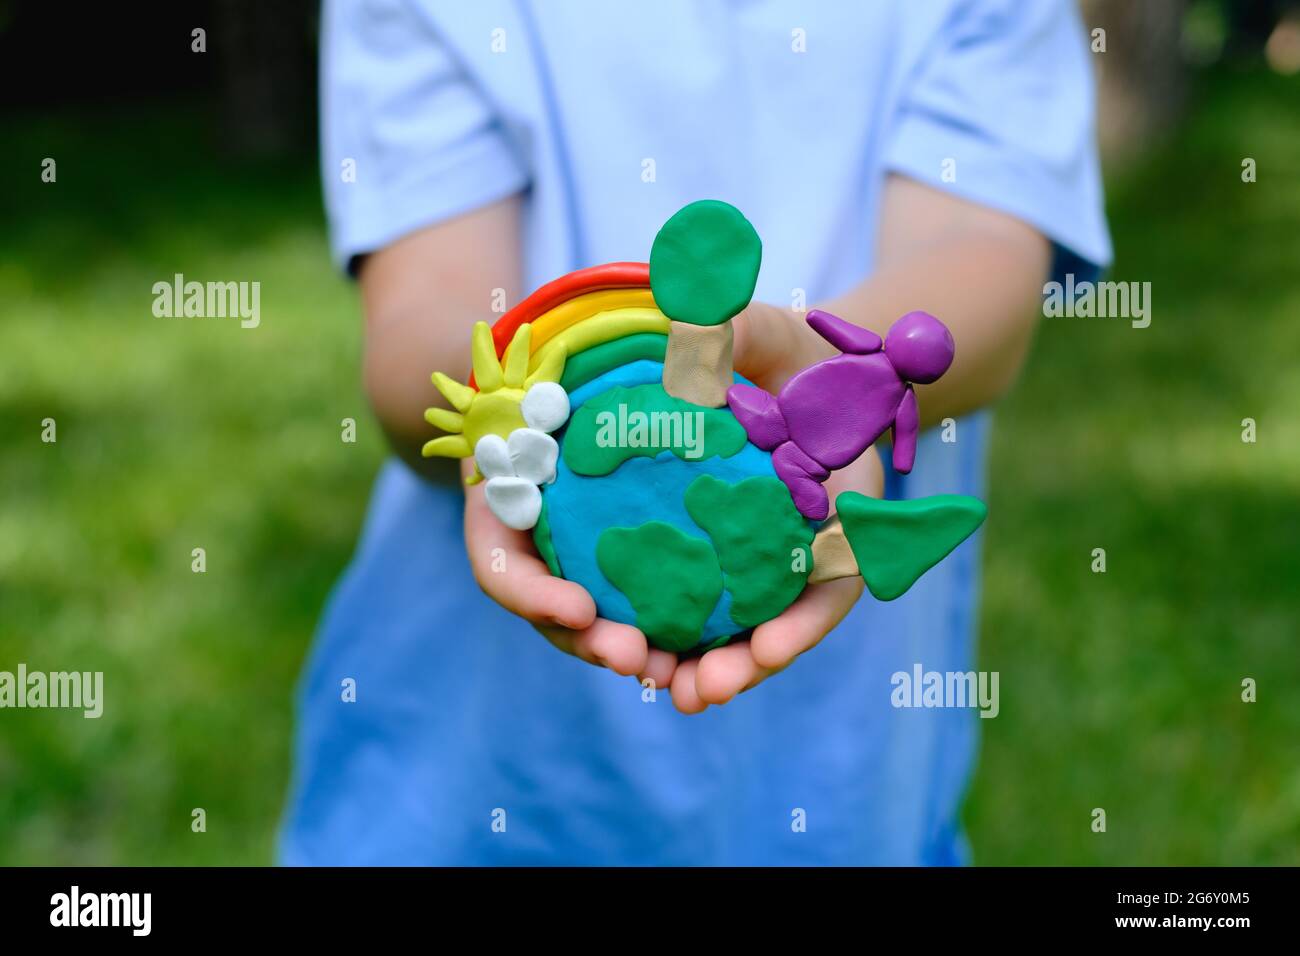 Environmental information and understanding. Child hands holding earth model with clay rainbow  Stock Photo